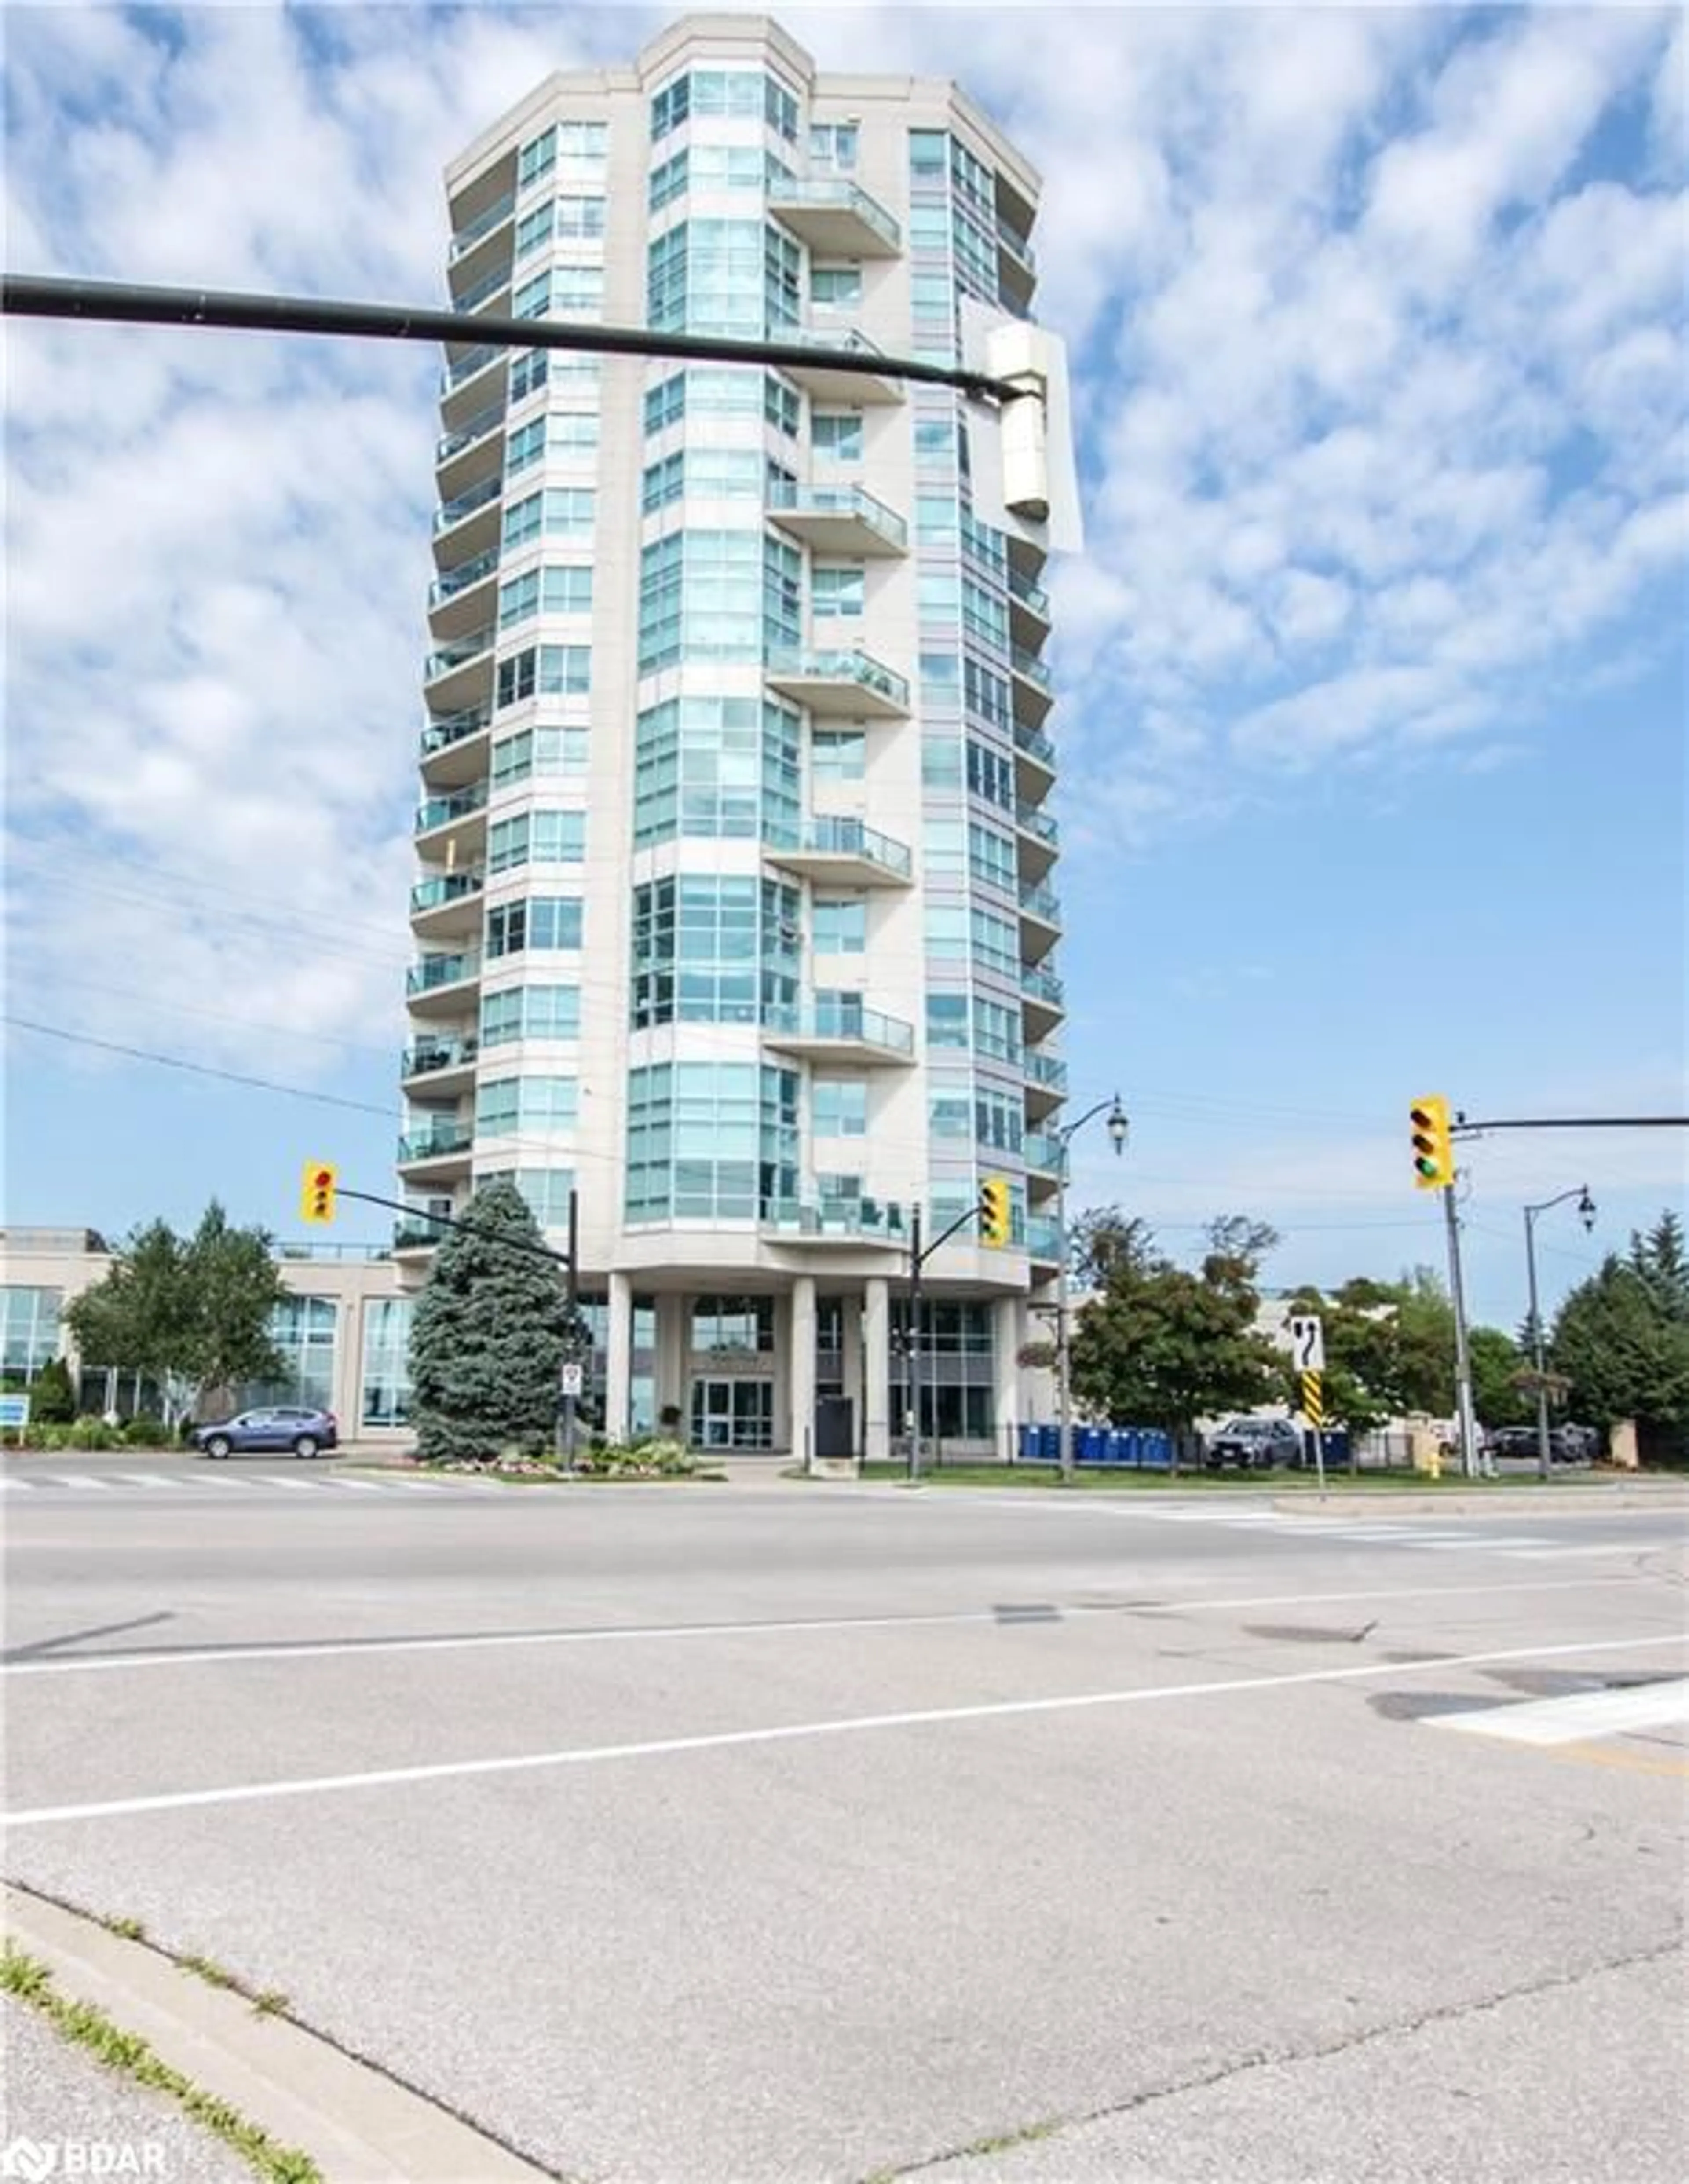 A pic from exterior of the house or condo for 6 Toronto St #407, Barrie Ontario L4N 9R2